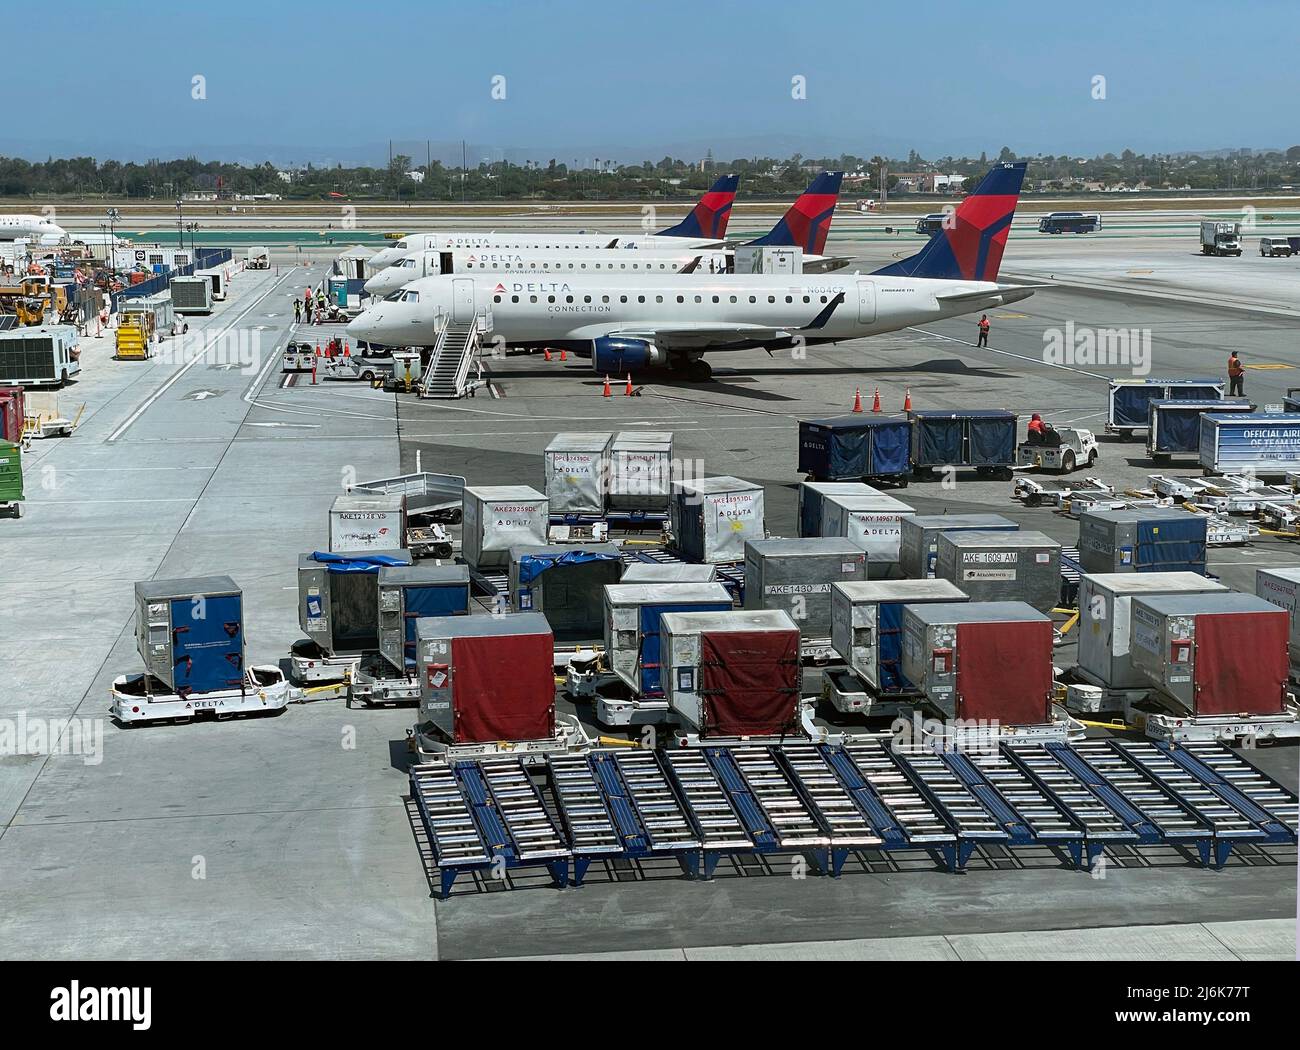 Delta airplanes and cargo containers at LAX in Los Angeles, CA Stock Photo